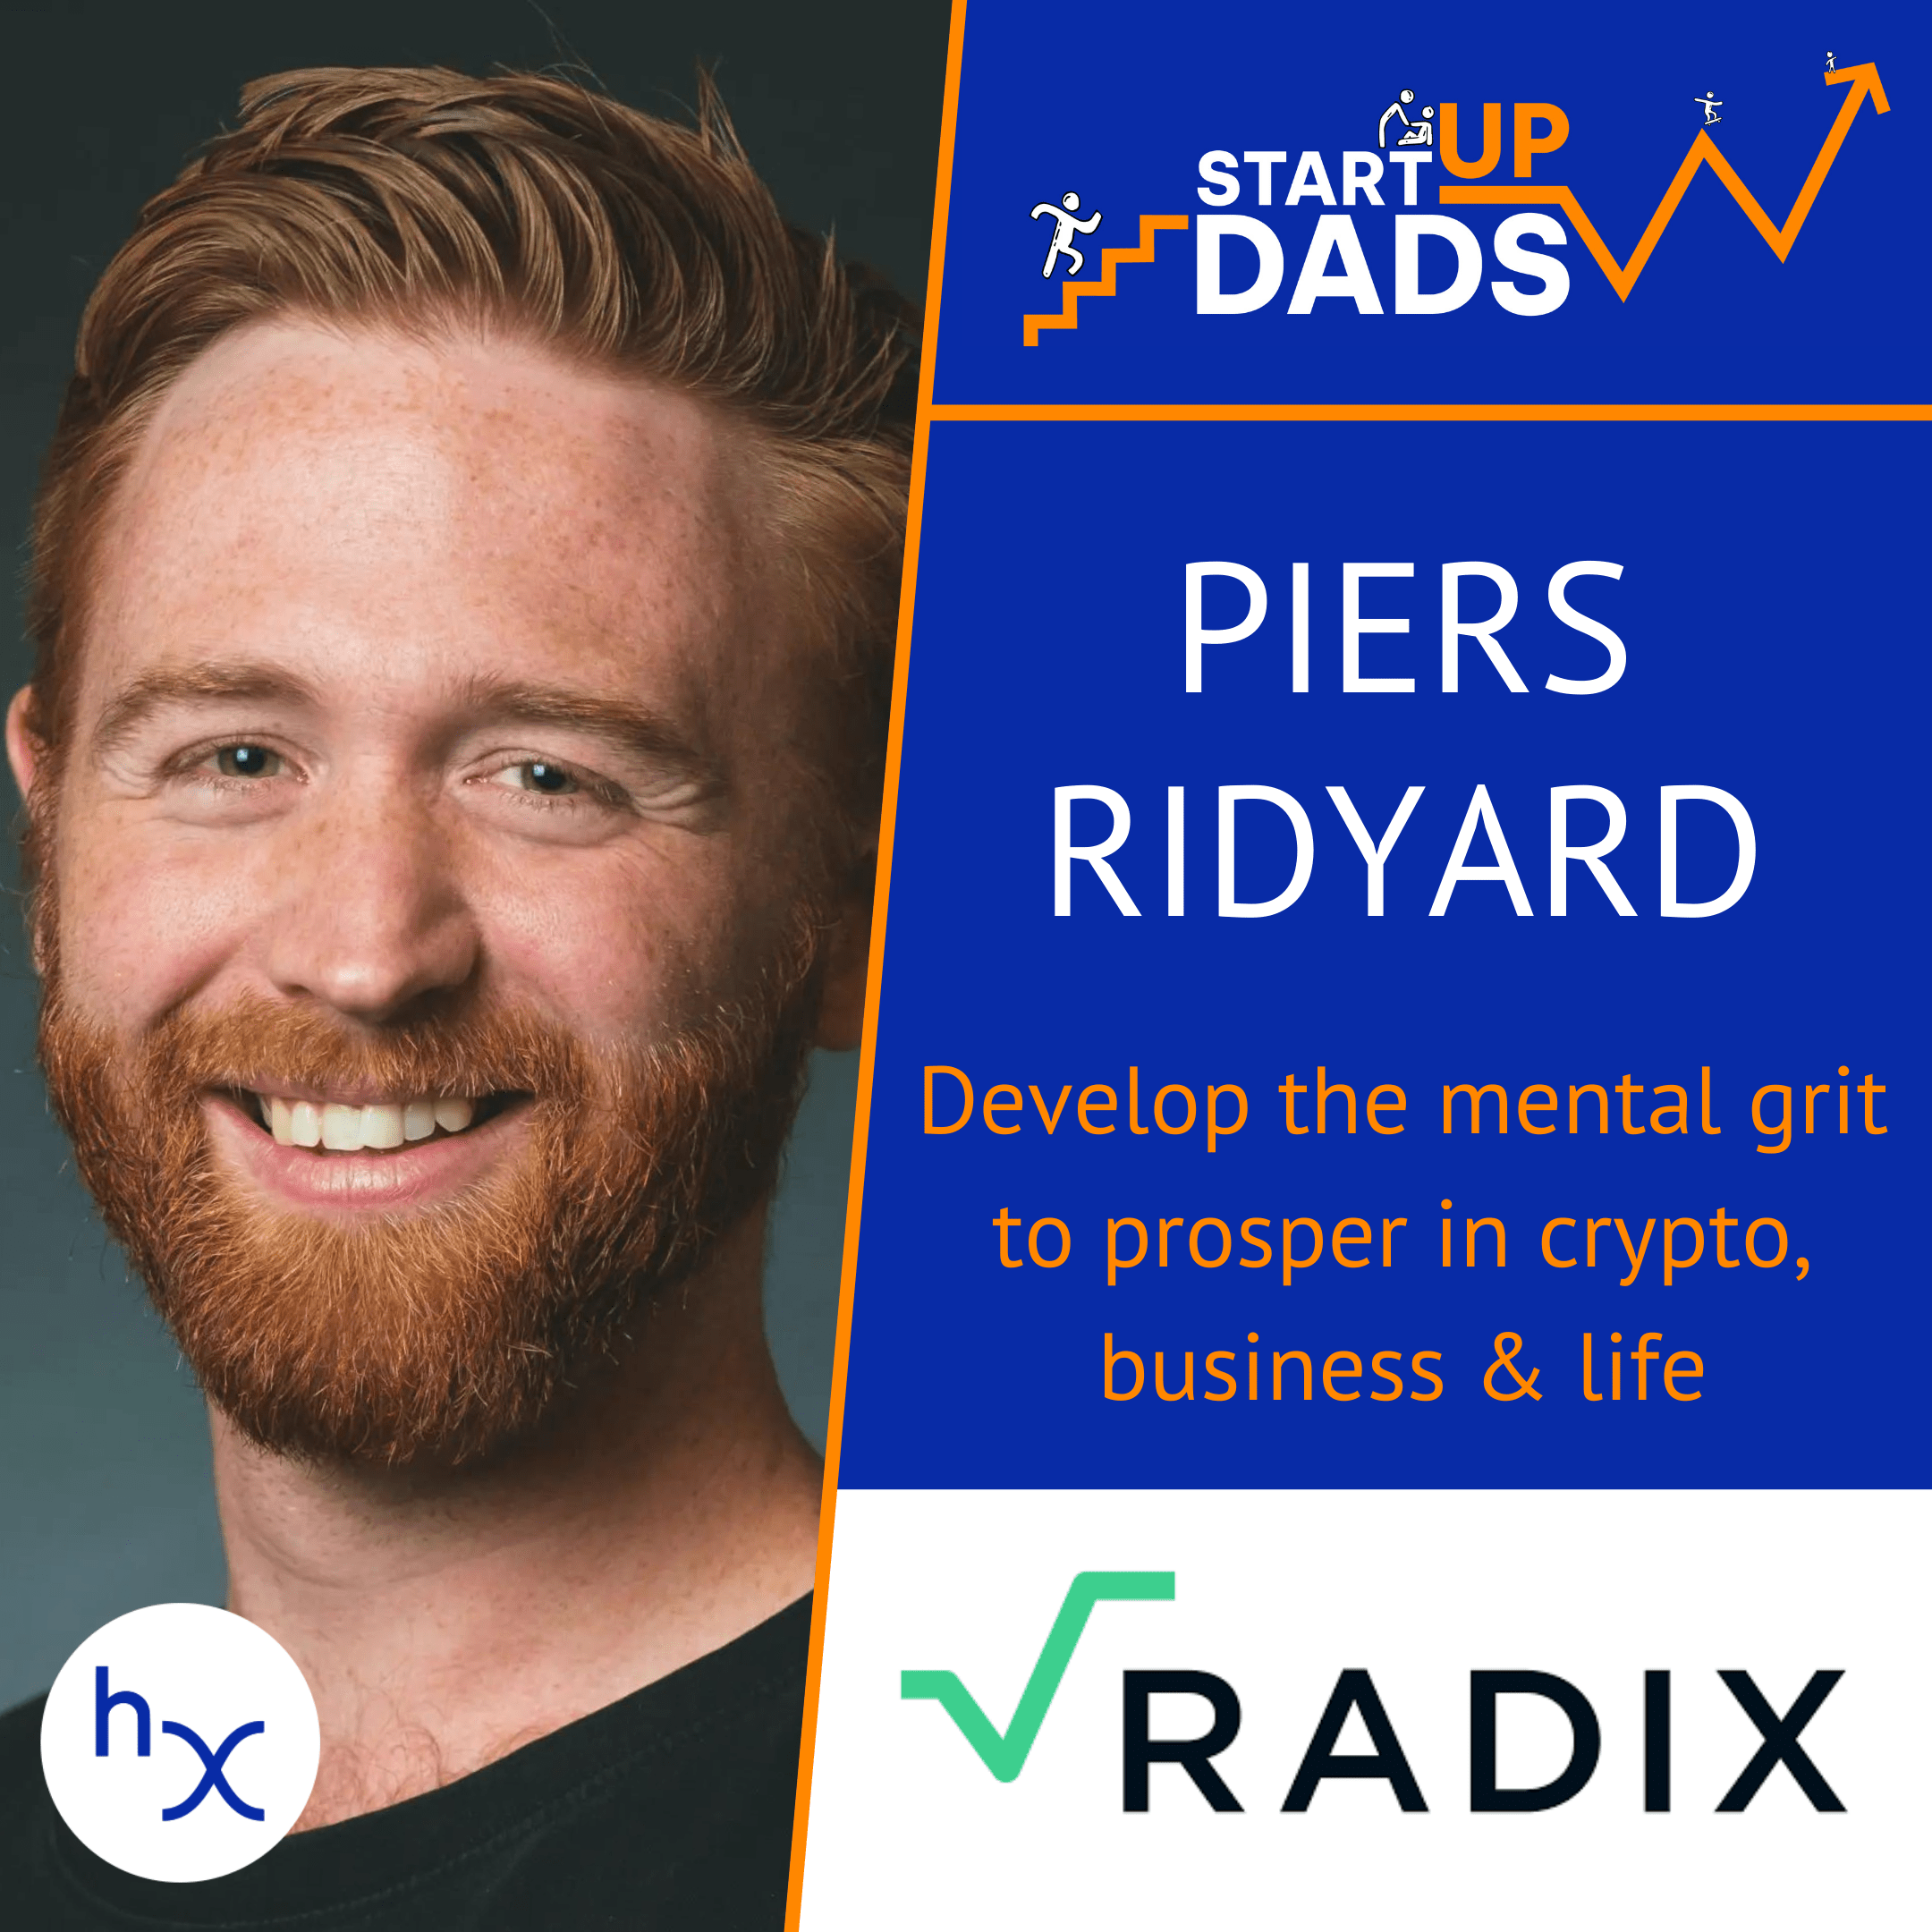 Develop the mental grit to prosper in crypto, business & life: Piers Ridyard, RDX Works